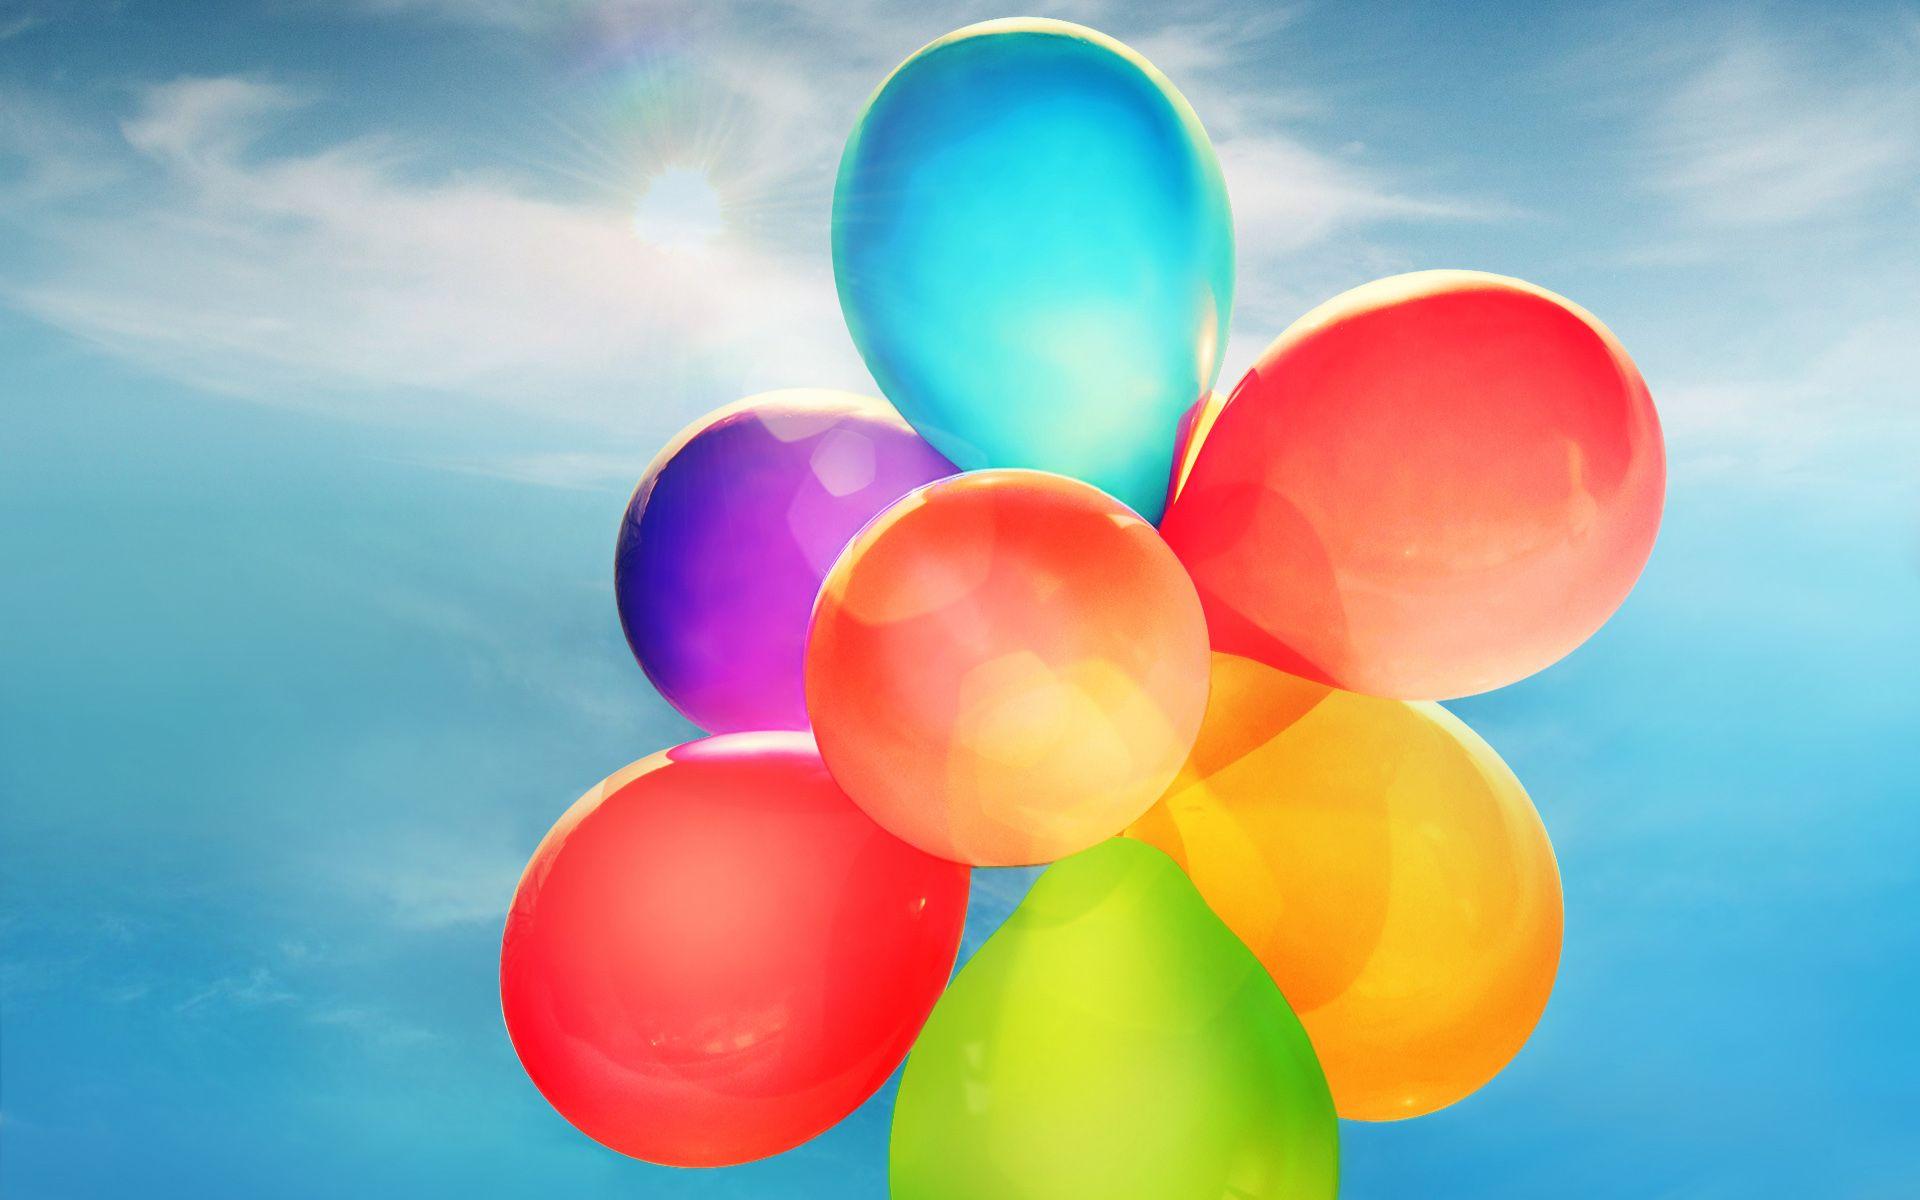 Balloons Wallpaper HD Picture